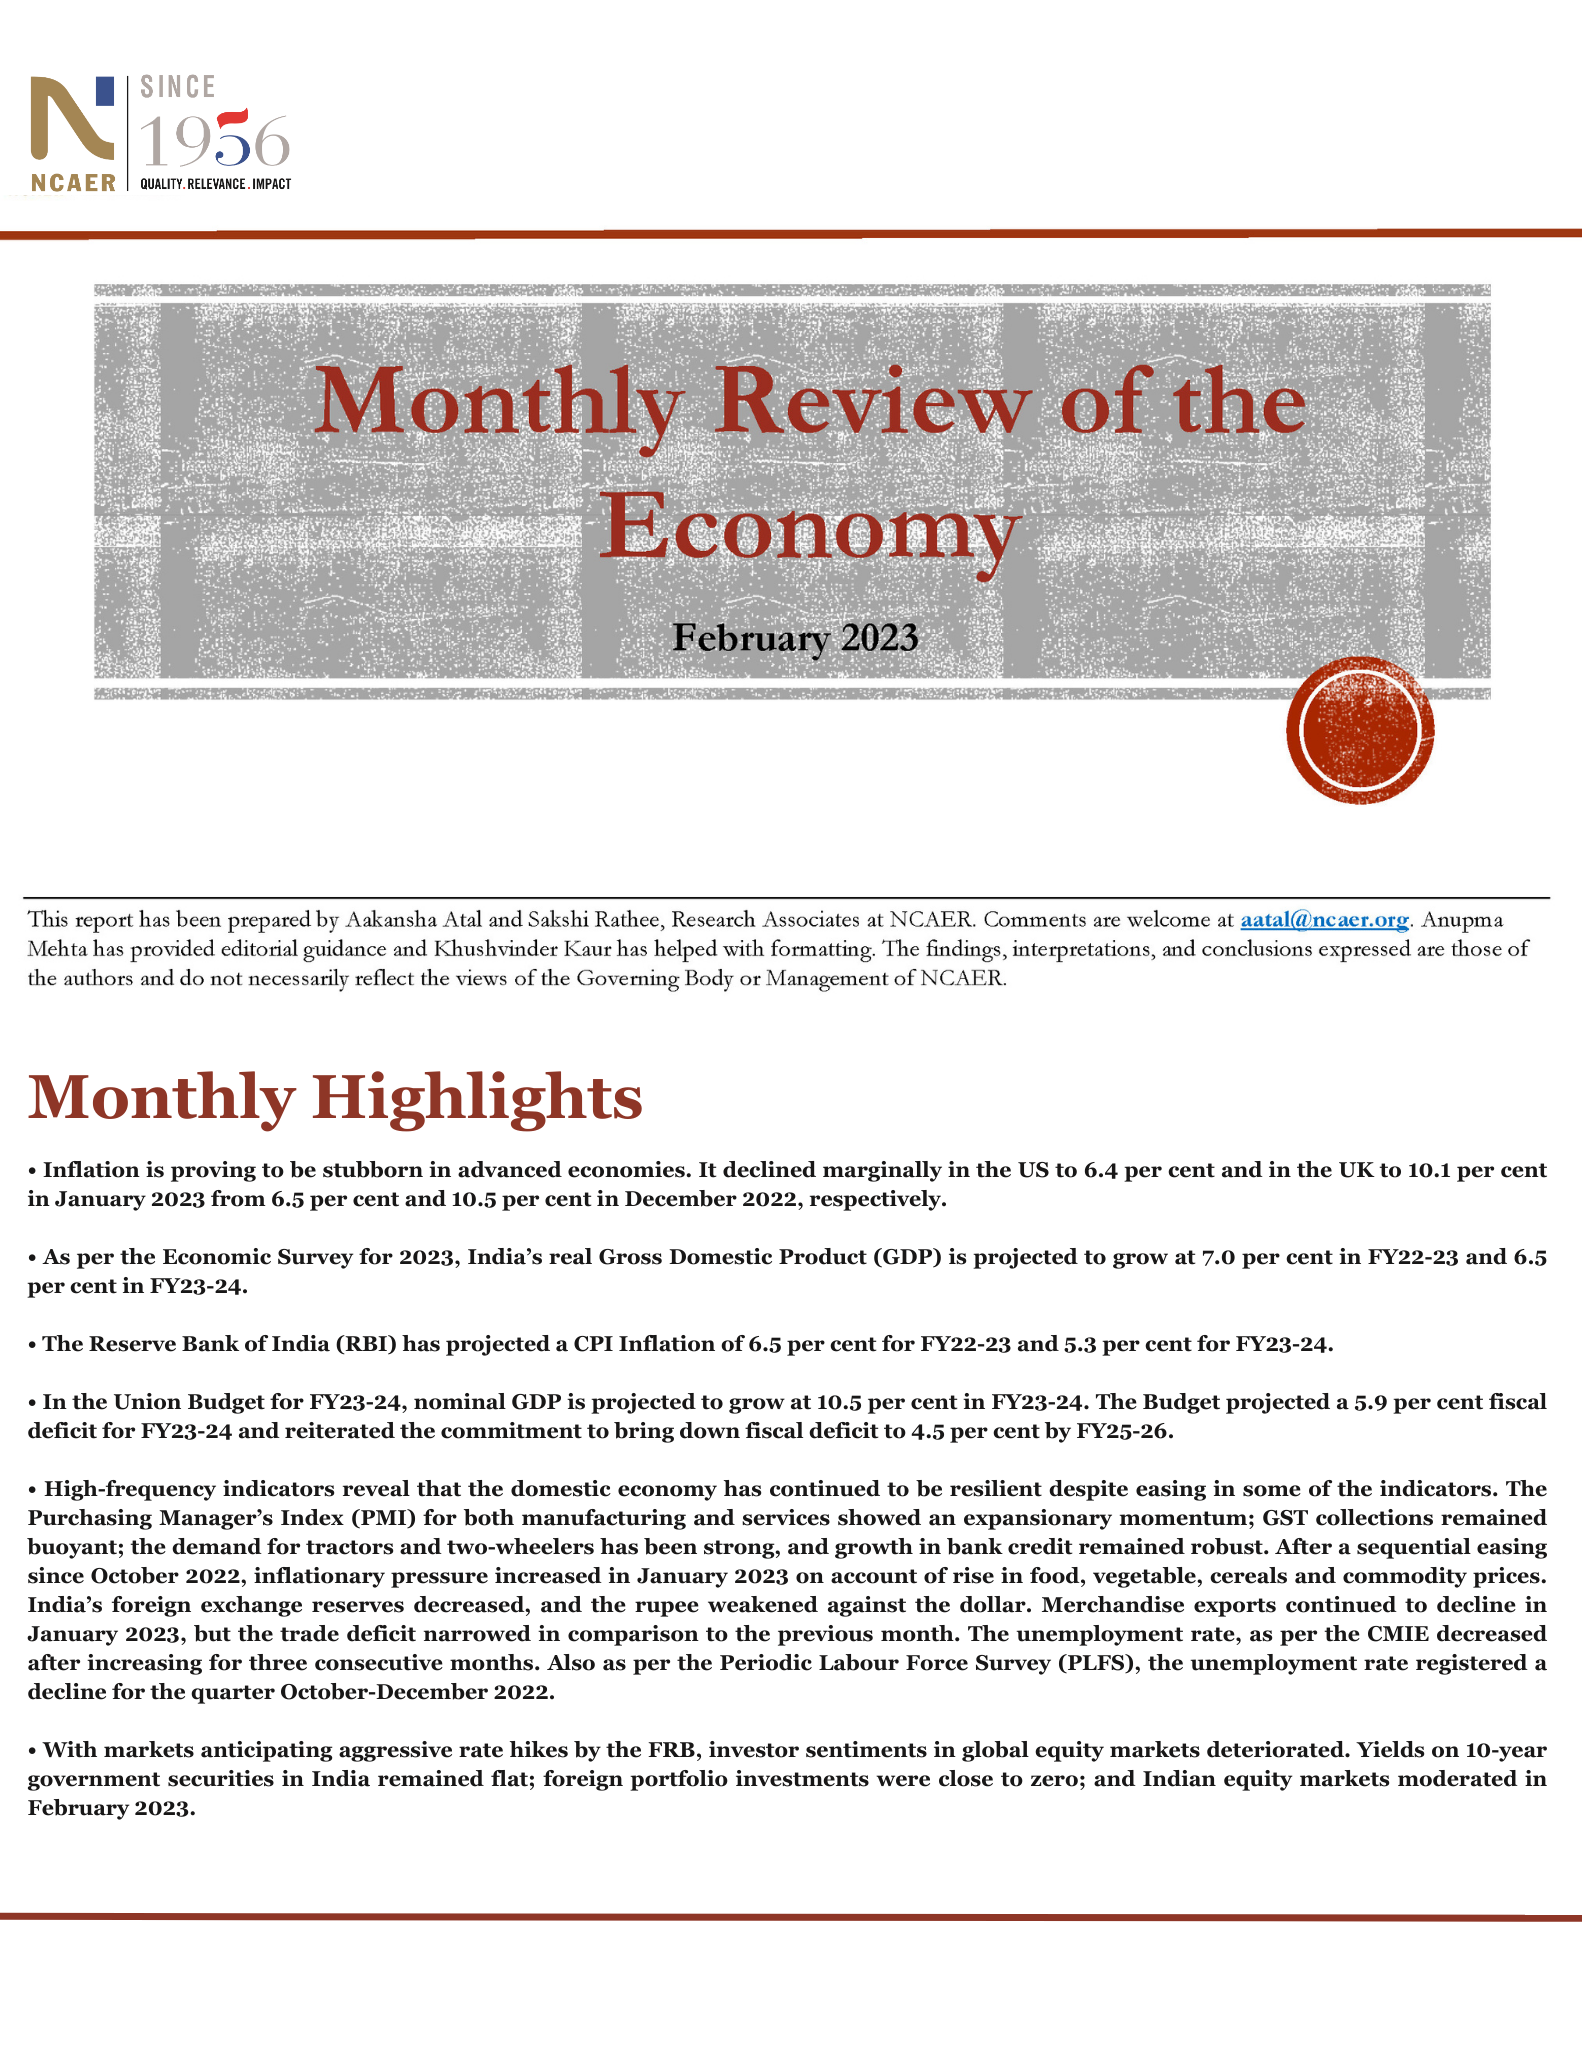 Monthly Review of the Economy – February 2023